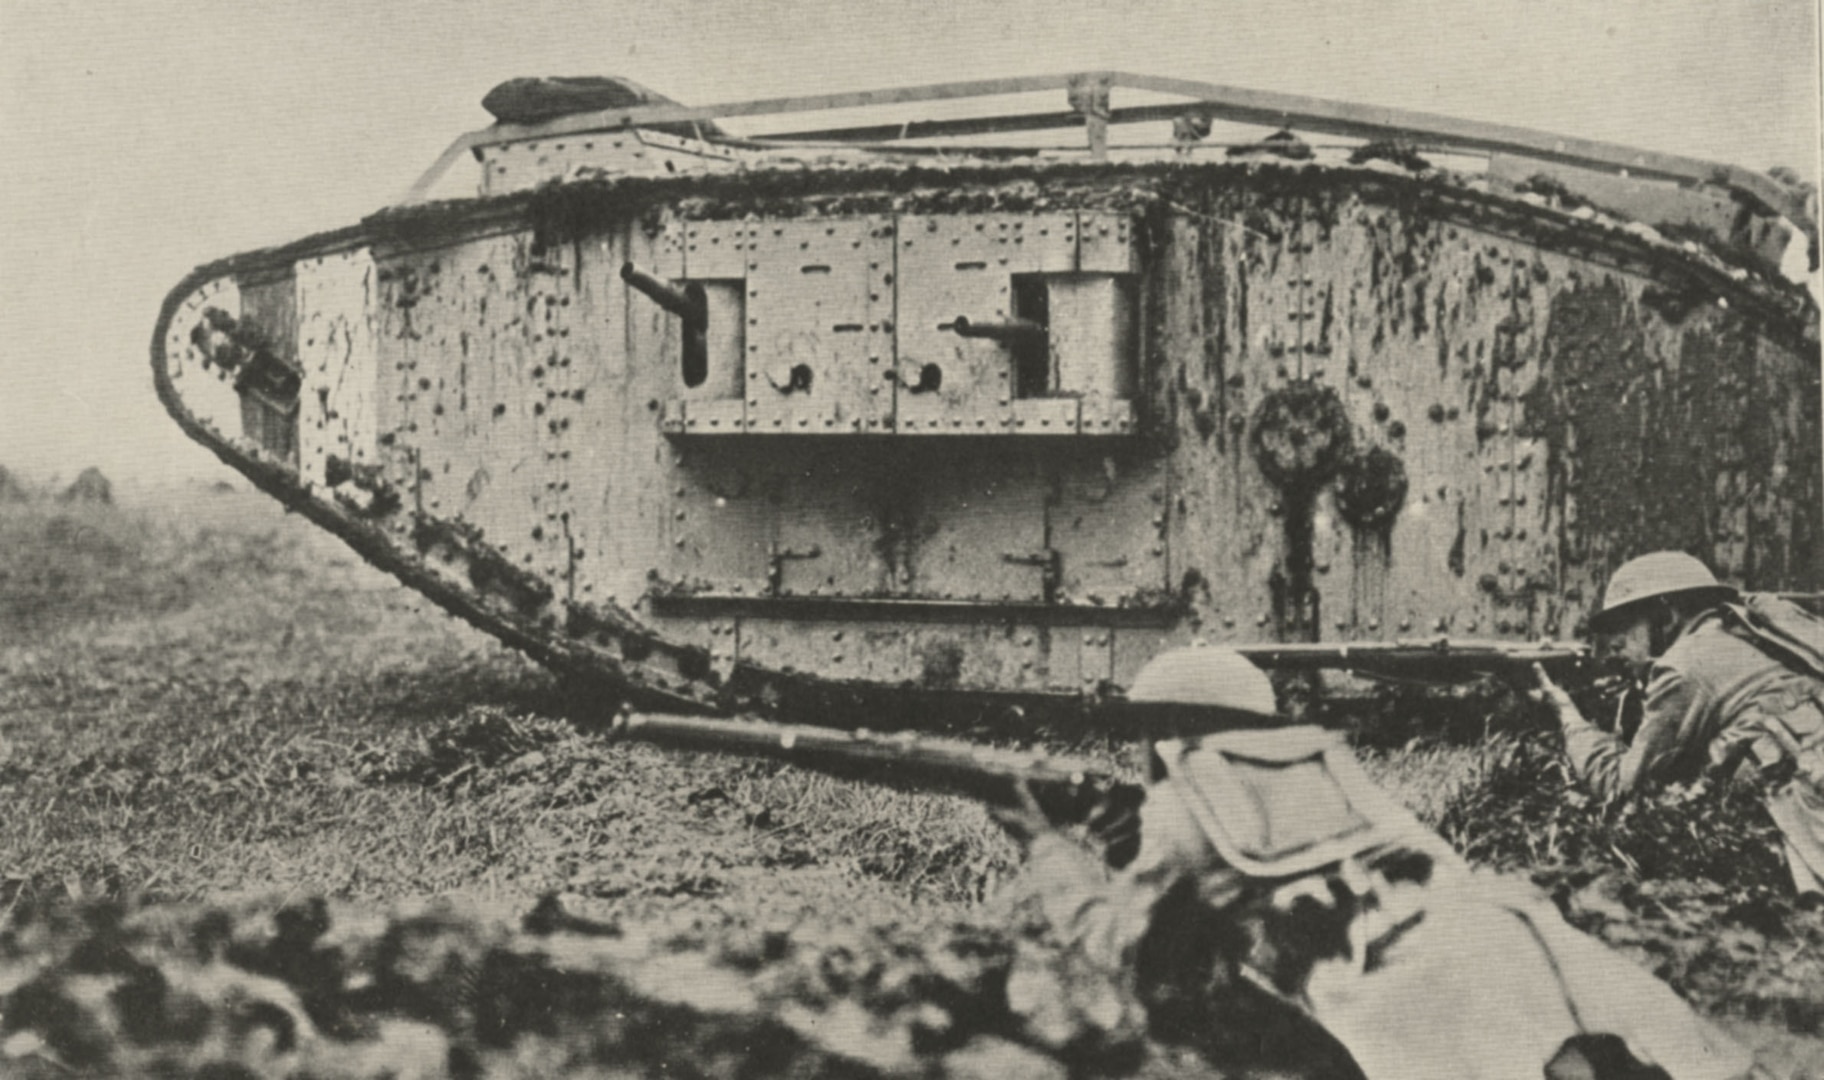 Soldiers of the New York National Guard's 107th Infantry Regiment, a part of the 27th Division, train with a British machine-gun armed tank during training for the assault on the Hindenburg Line during September 1918. When the attack kicked off, the 107th lost 1,000 men wounded and killed out of a strength of 1,662. The tanks that supported the attack on Sept. 29, 1918, were quickly knocked out.